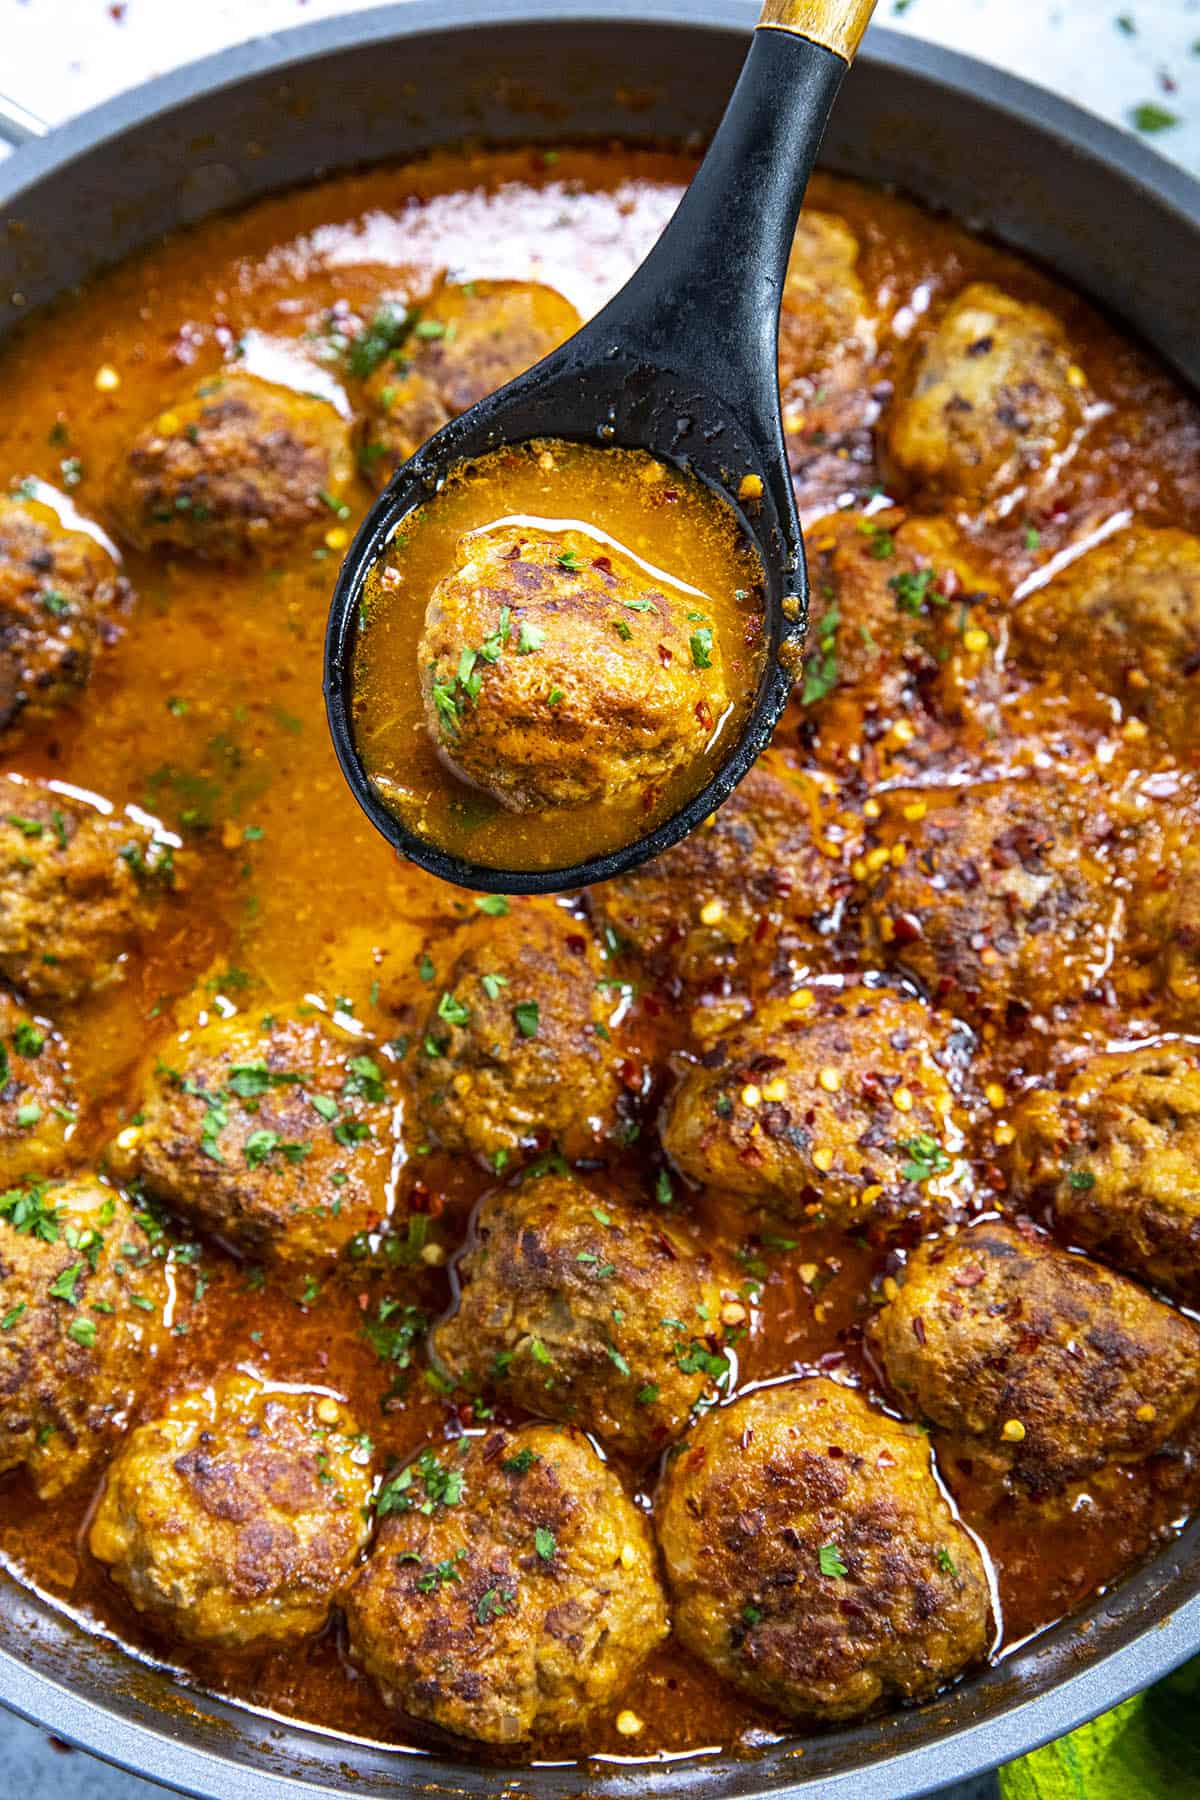 Serving a Mexican meatball (Albondigas) from the hot pan